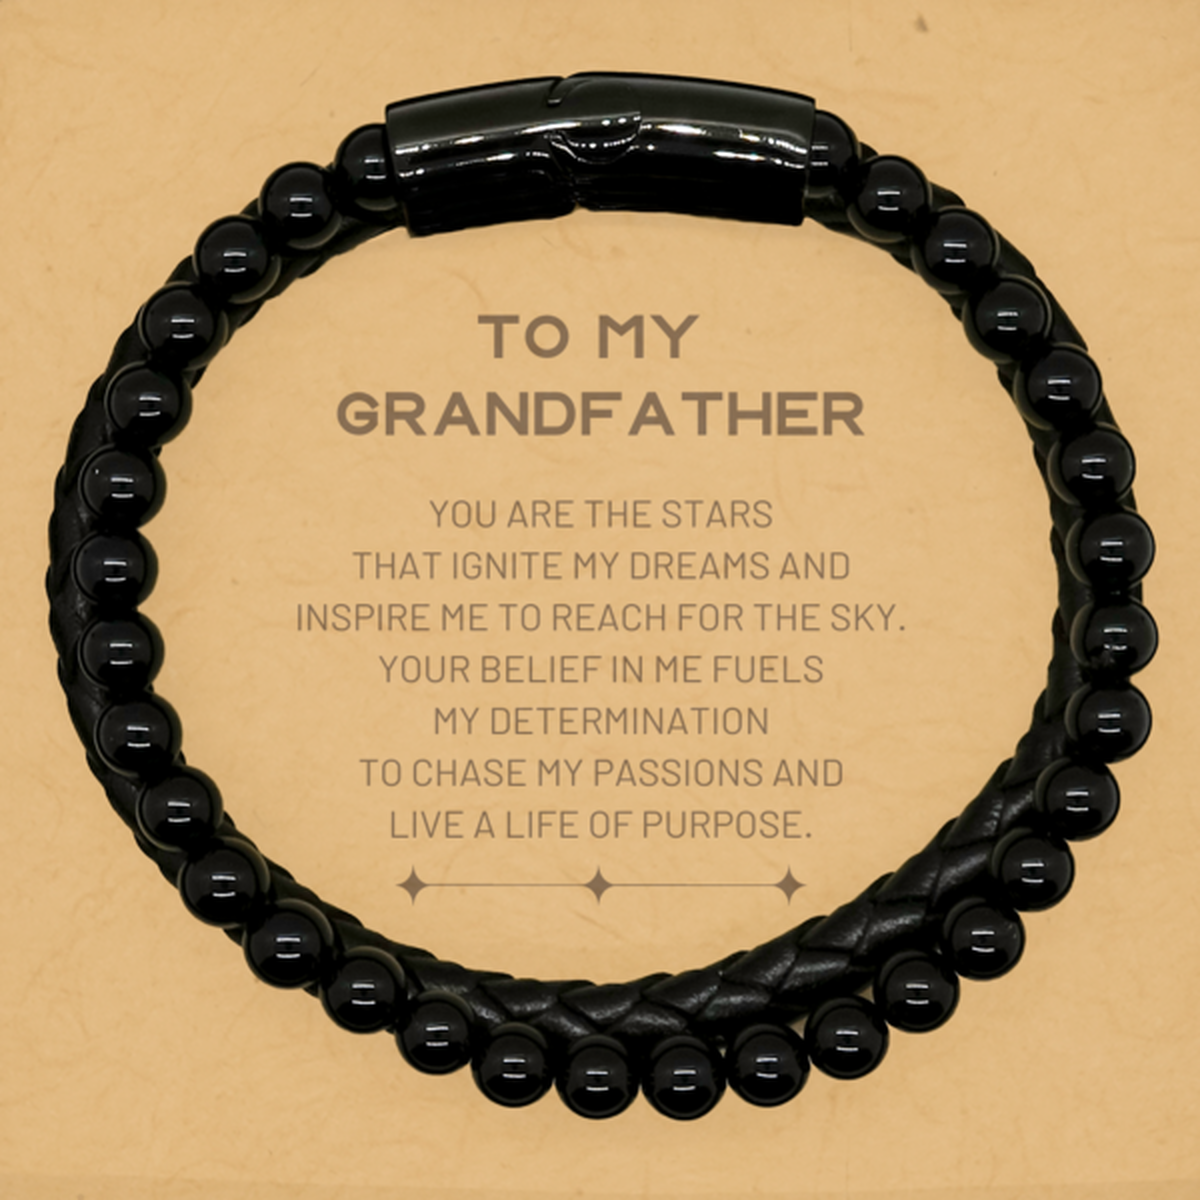 To My Grandfather Stone Leather Bracelets, You are the stars that ignite my dreams and inspire me to reach for the sky, Birthday Unique Gifts For Grandfather, Thank You Gifts For Grandfather